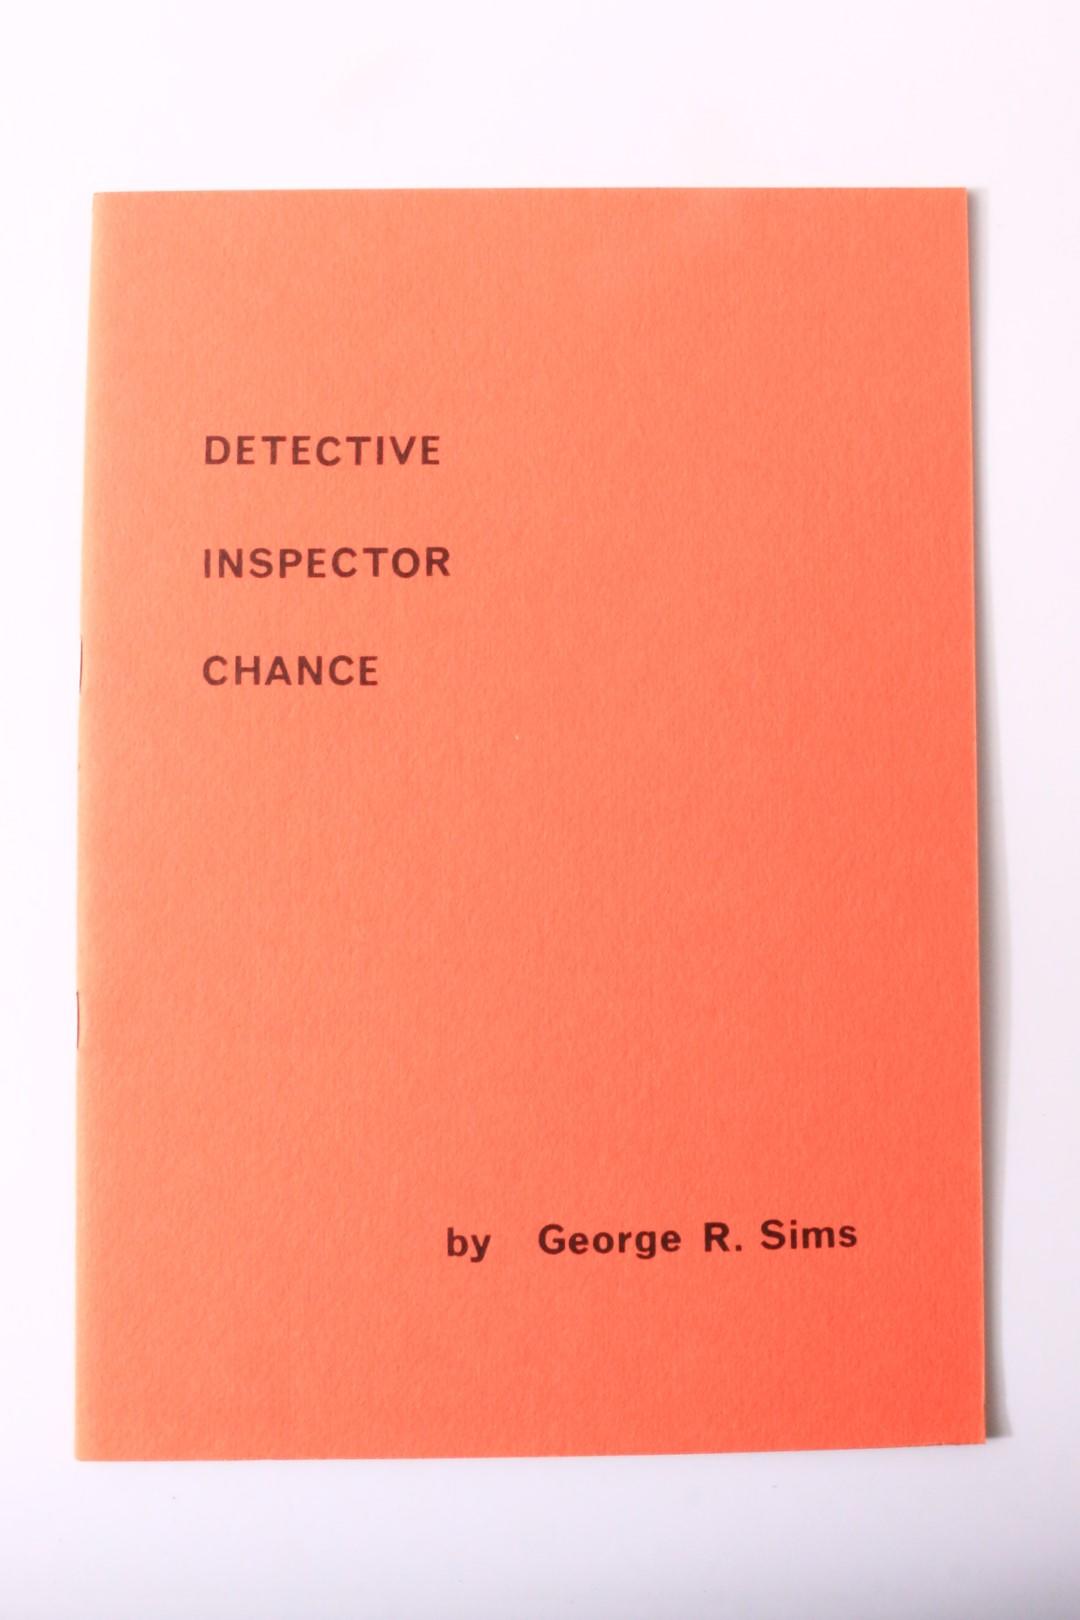 George R. Sims - Detective Inspector Chance - Ferret Fantasy, 1974, Limited Edition.